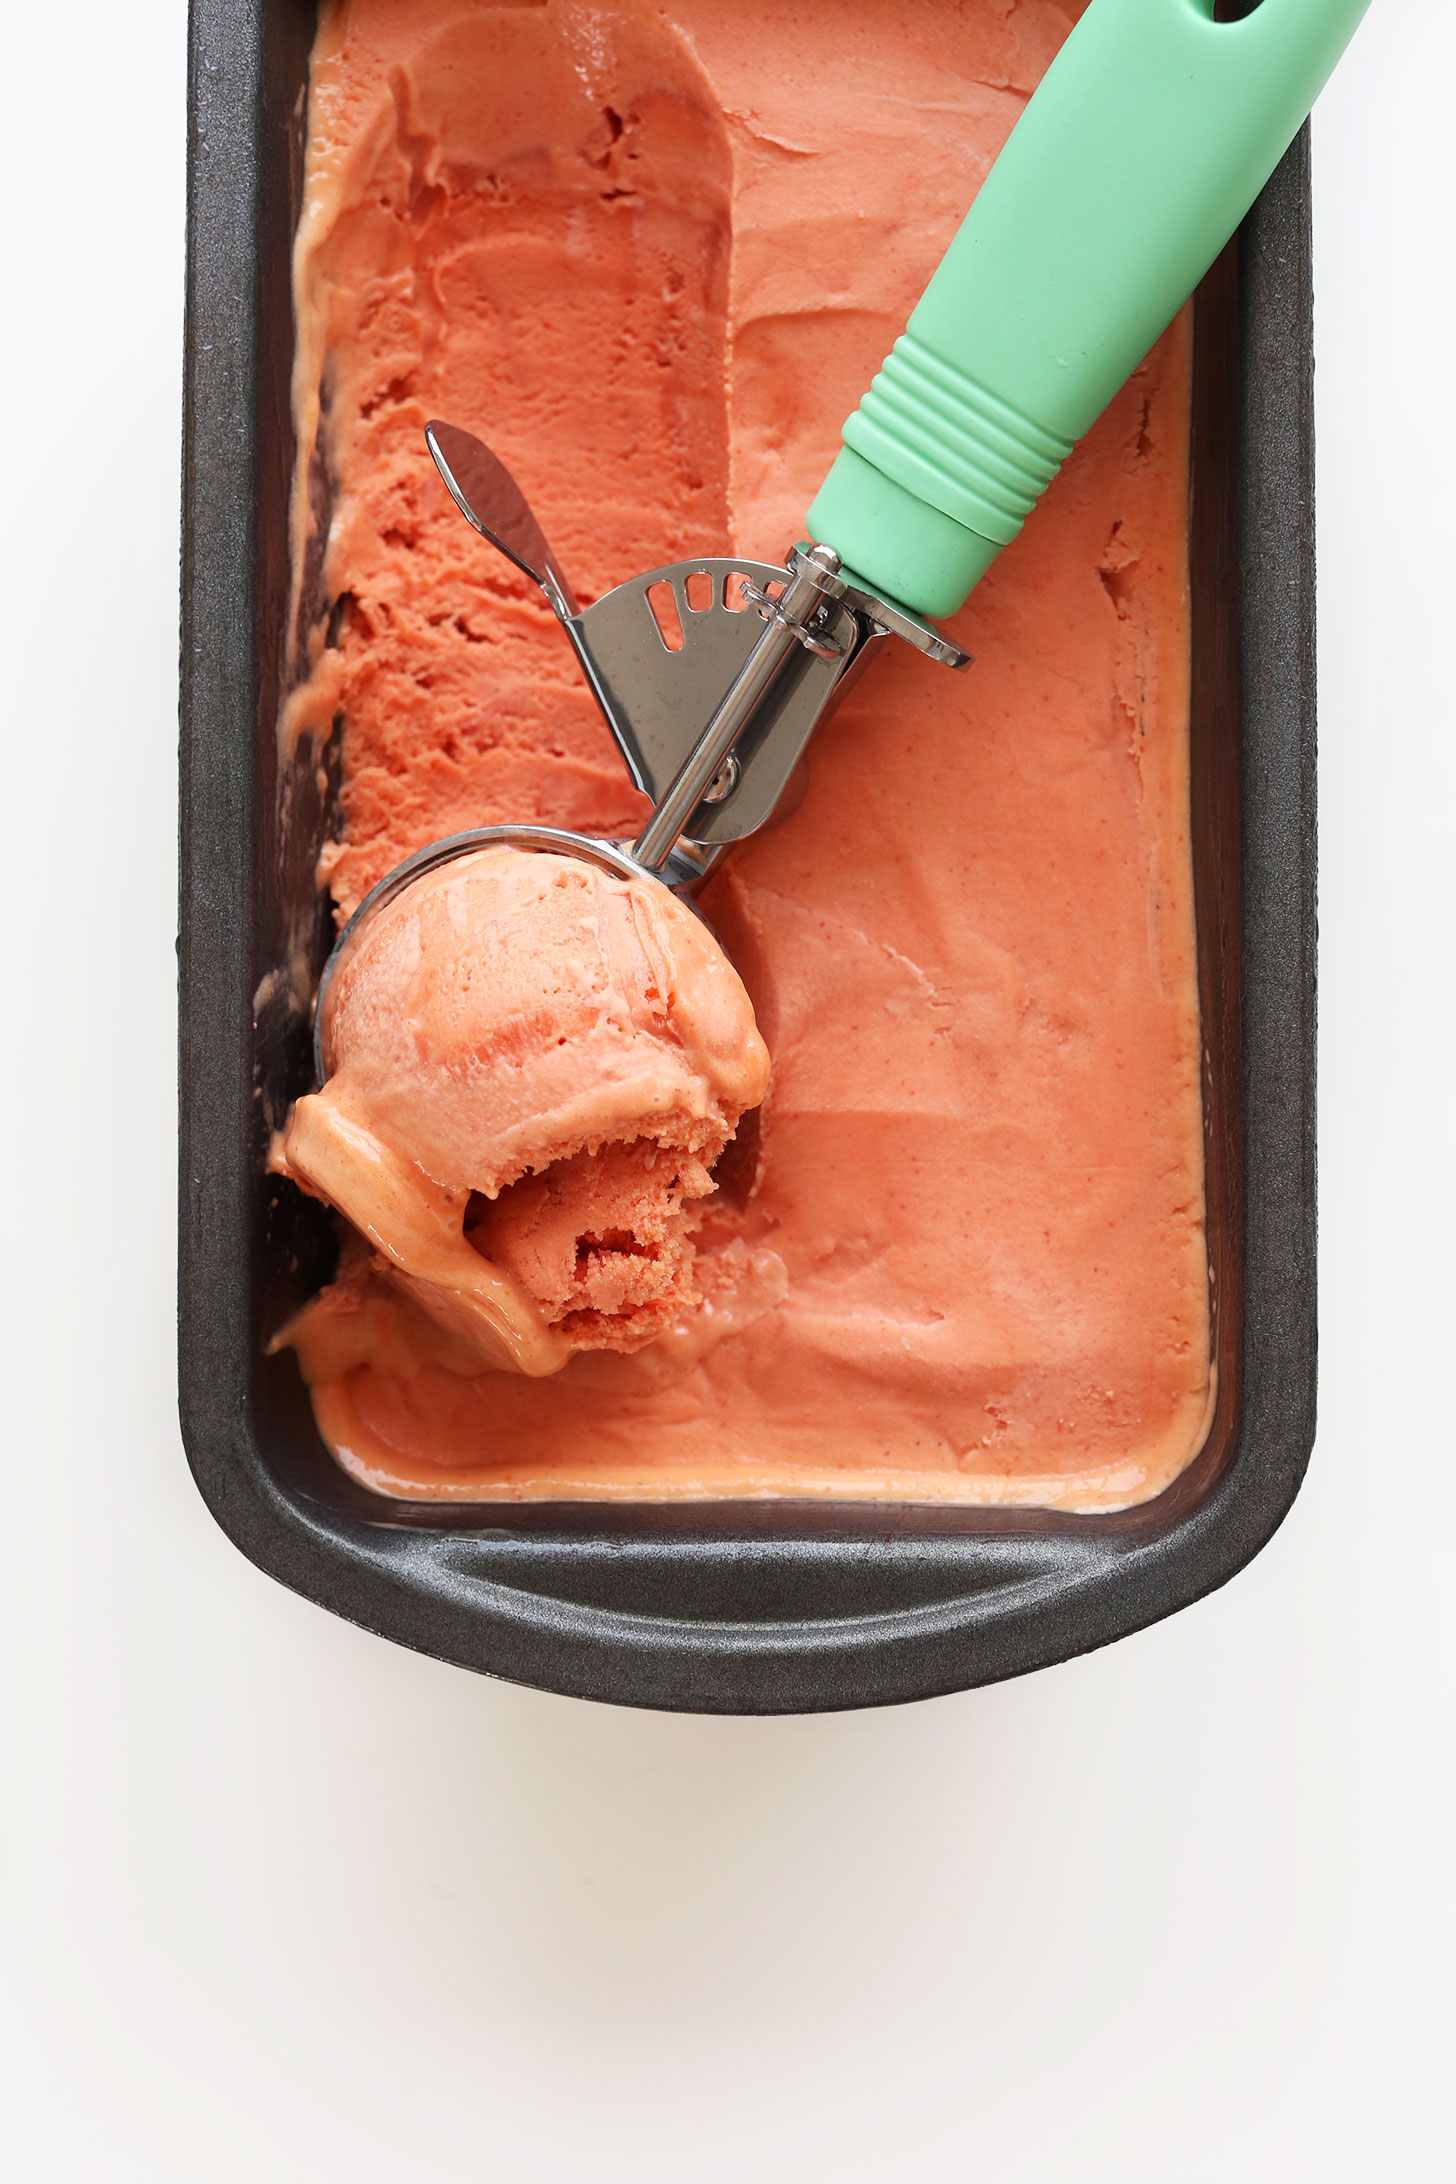 Using an ice cream scooper to grab a scoop of delicious homemade Mango Raspberry Coconut Sorbet